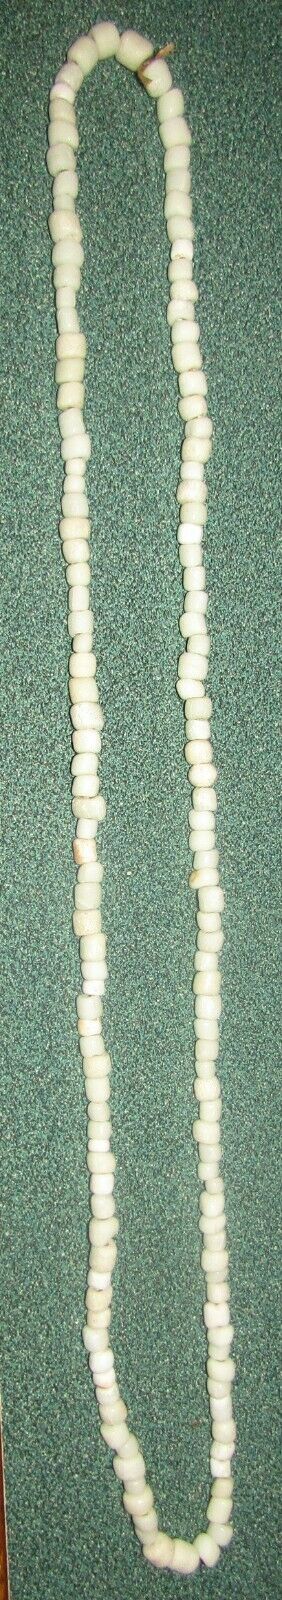 Indian Artifacts 145 Glass White Trade Bead Necklace, Colusa, Cty California